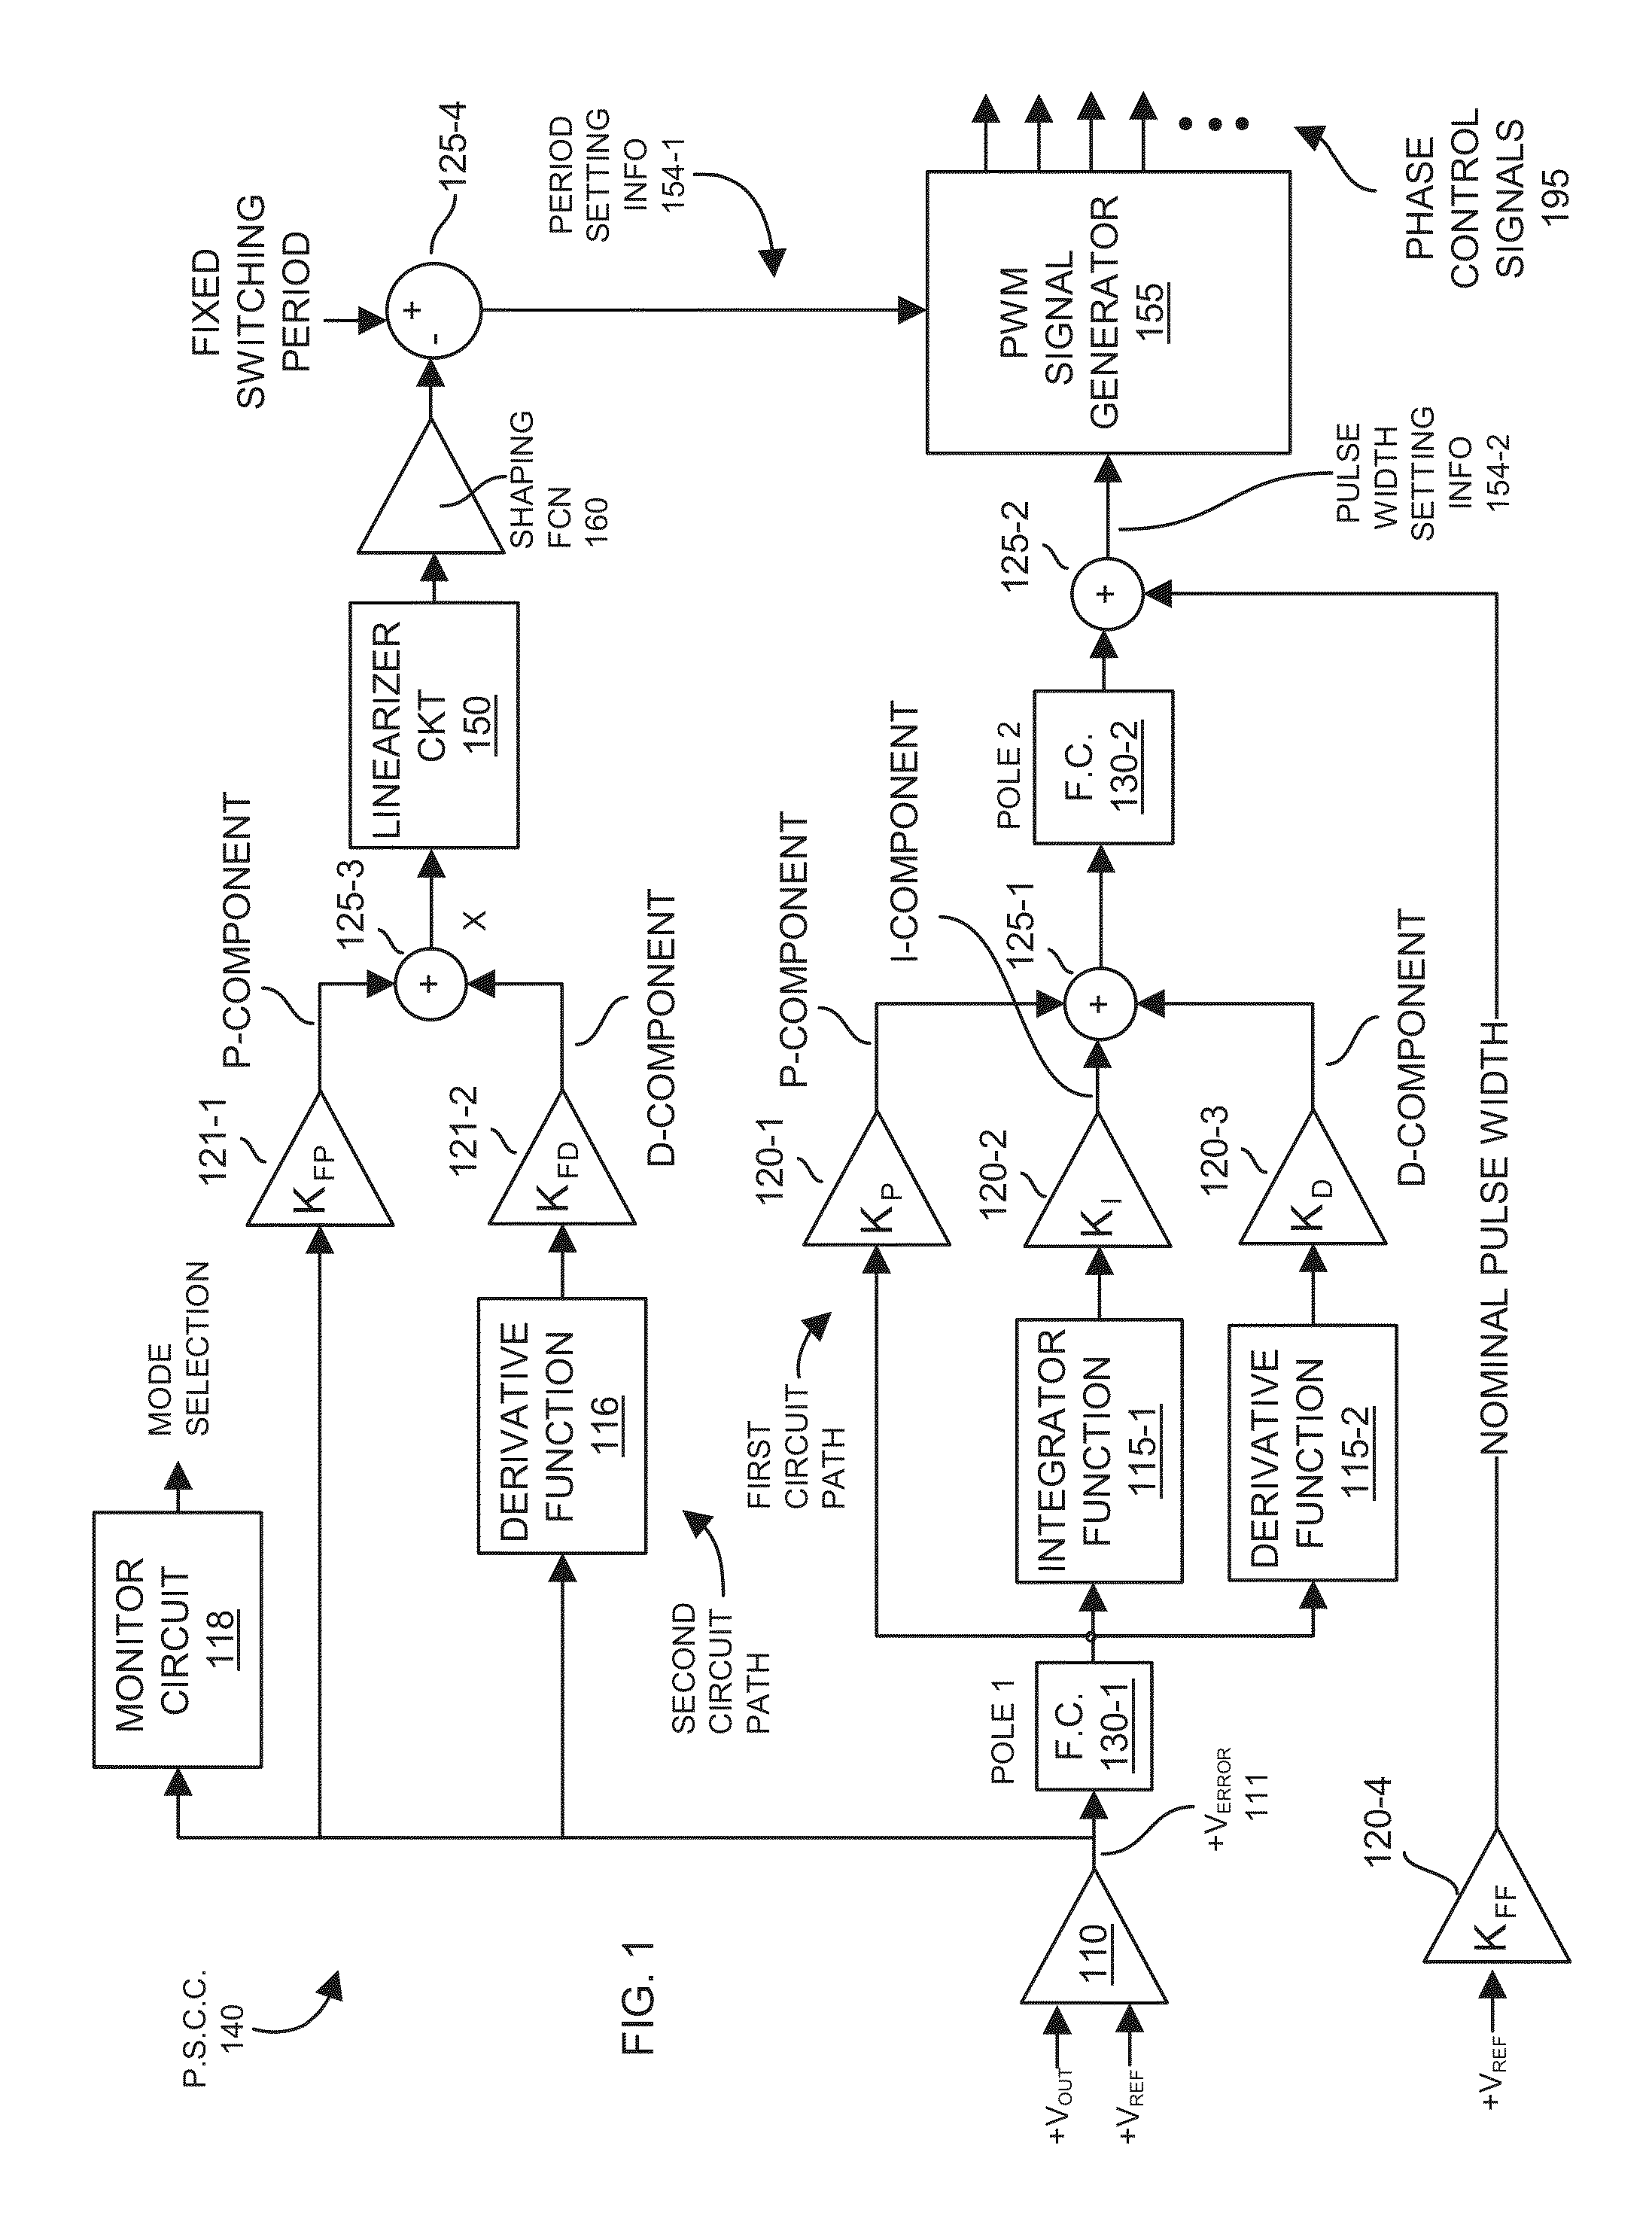 Power supply circuitry and adaptive transient control